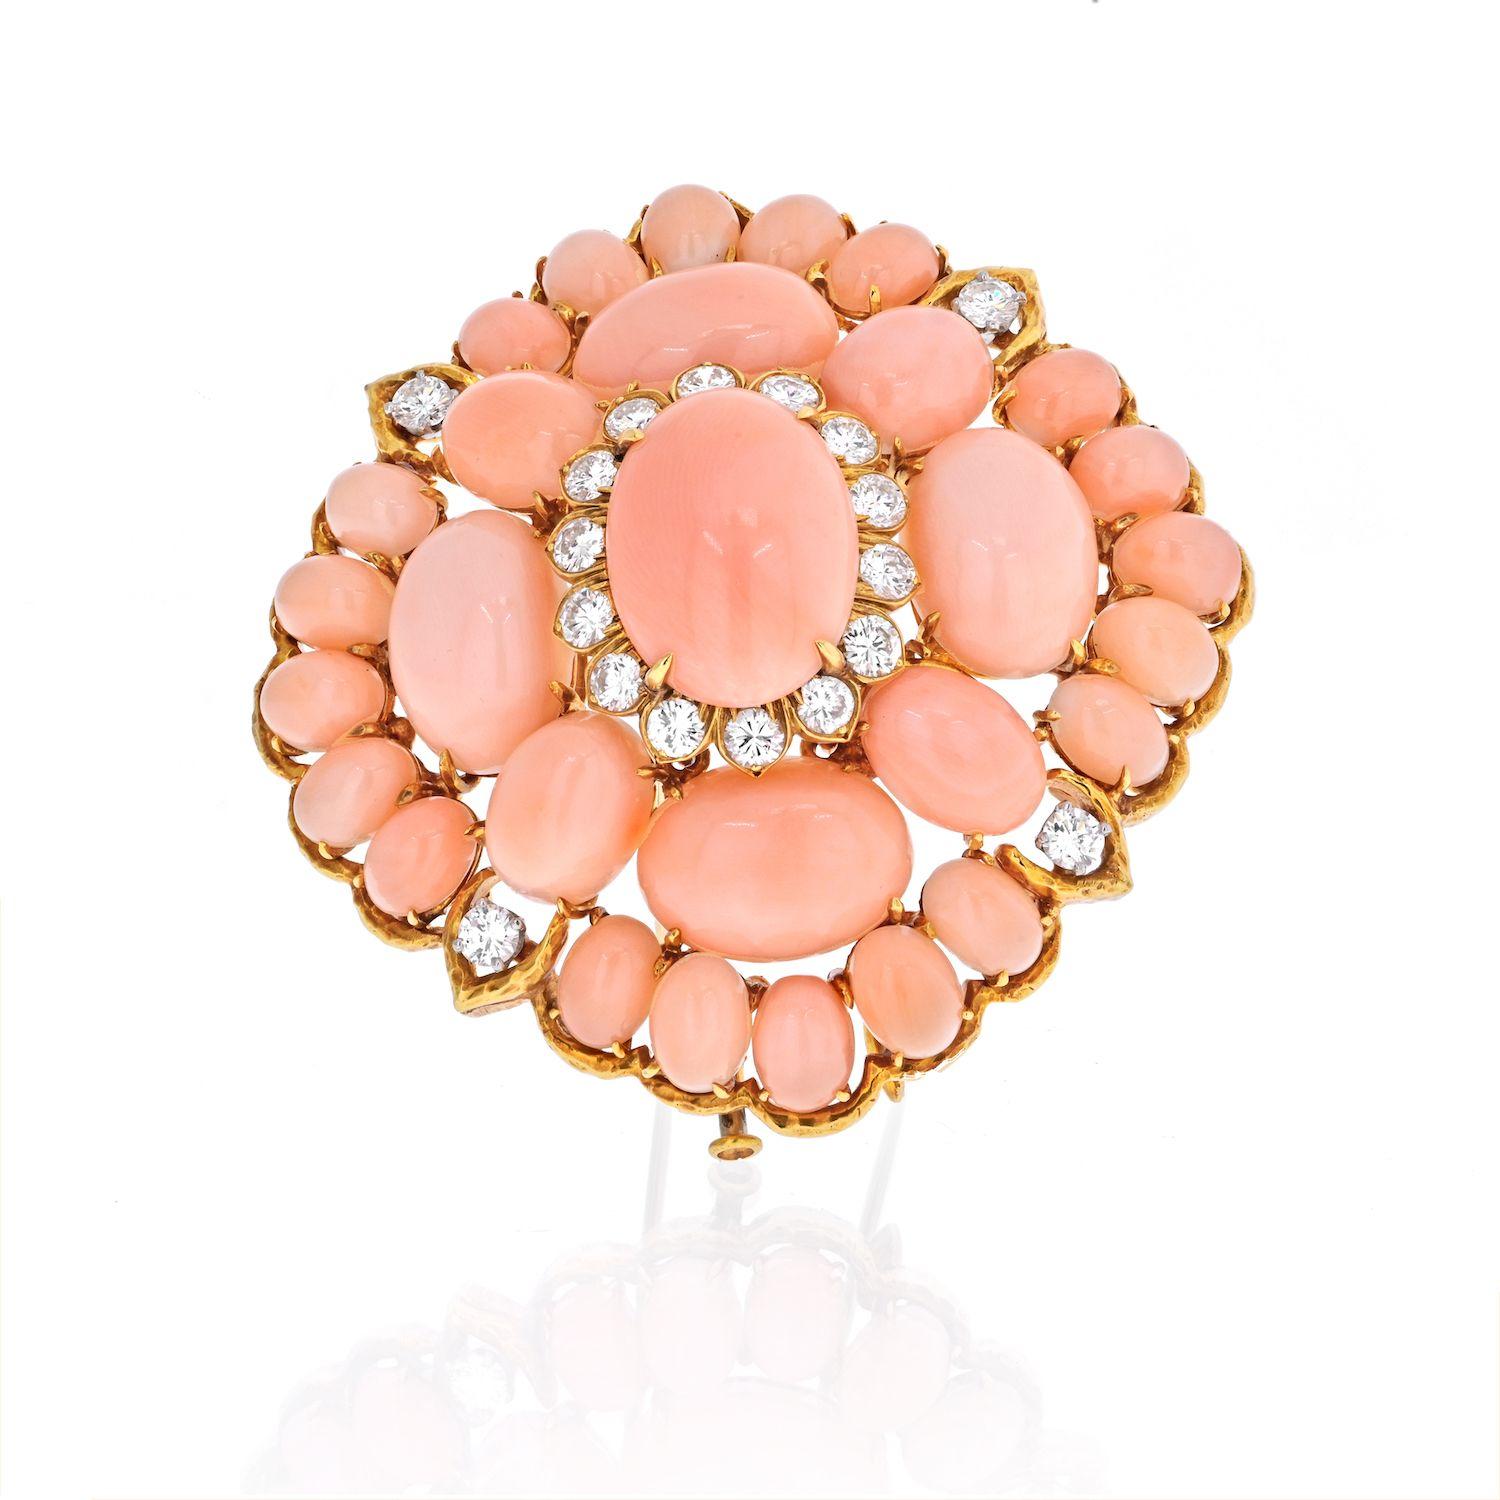 We are absolutely in love with this lozenge-shaped panel pink coral cluster brooch by David Webb. It is composed of cabochon shaped corals and further accented with round brilliant cut accents. The sizable oval cabochon coral is framed three times